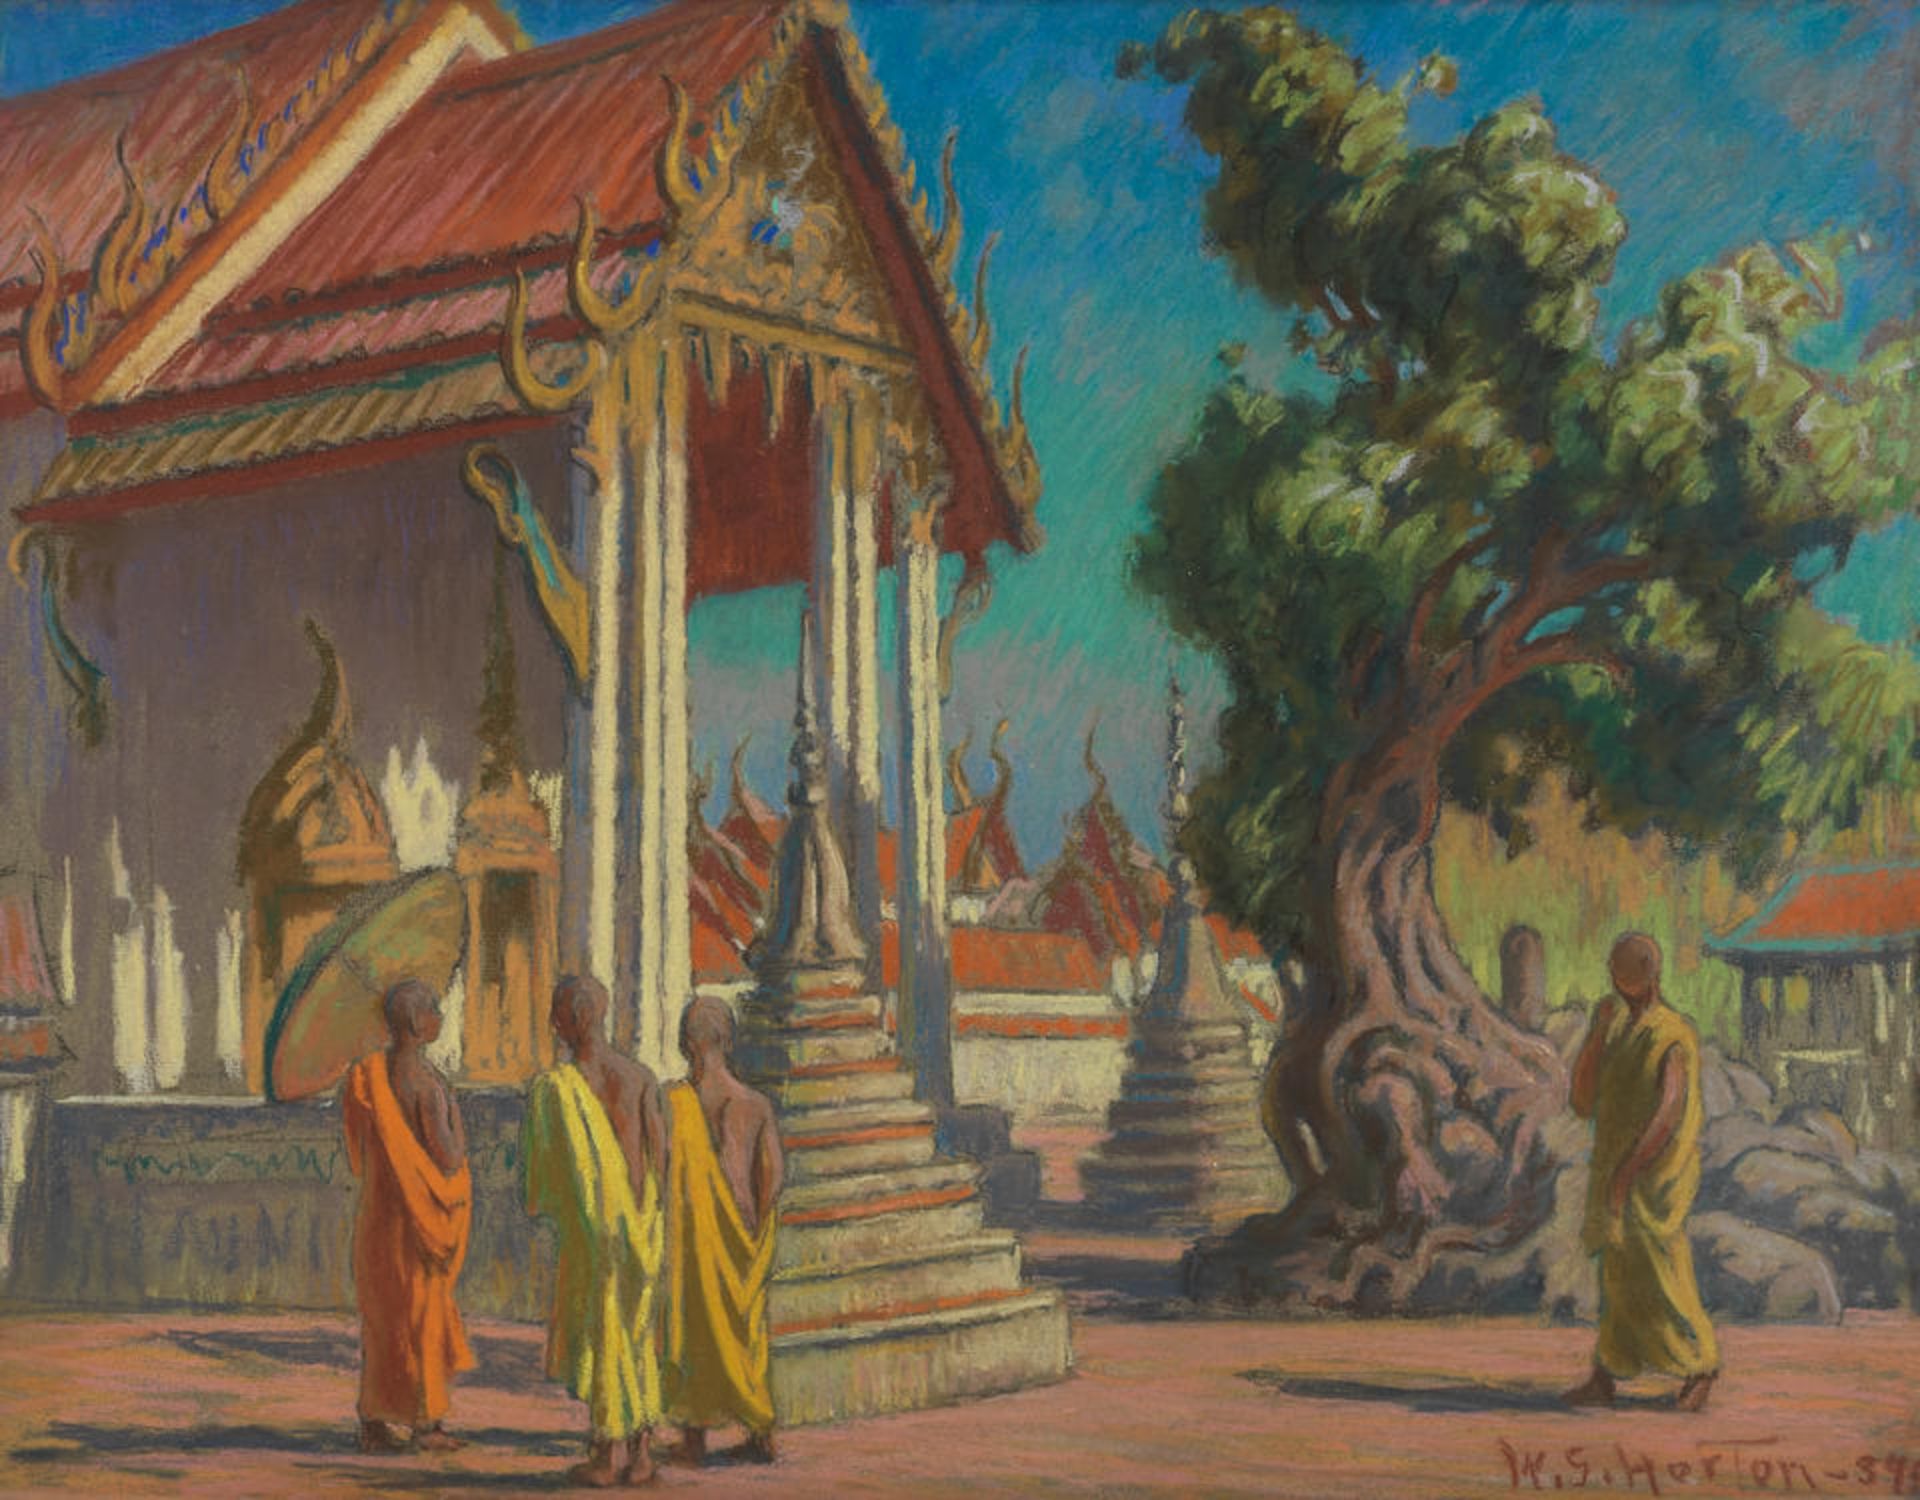 William Samuel Horton (American, 1865-1936) Buddhist monks before a temple, thought to be in Burma